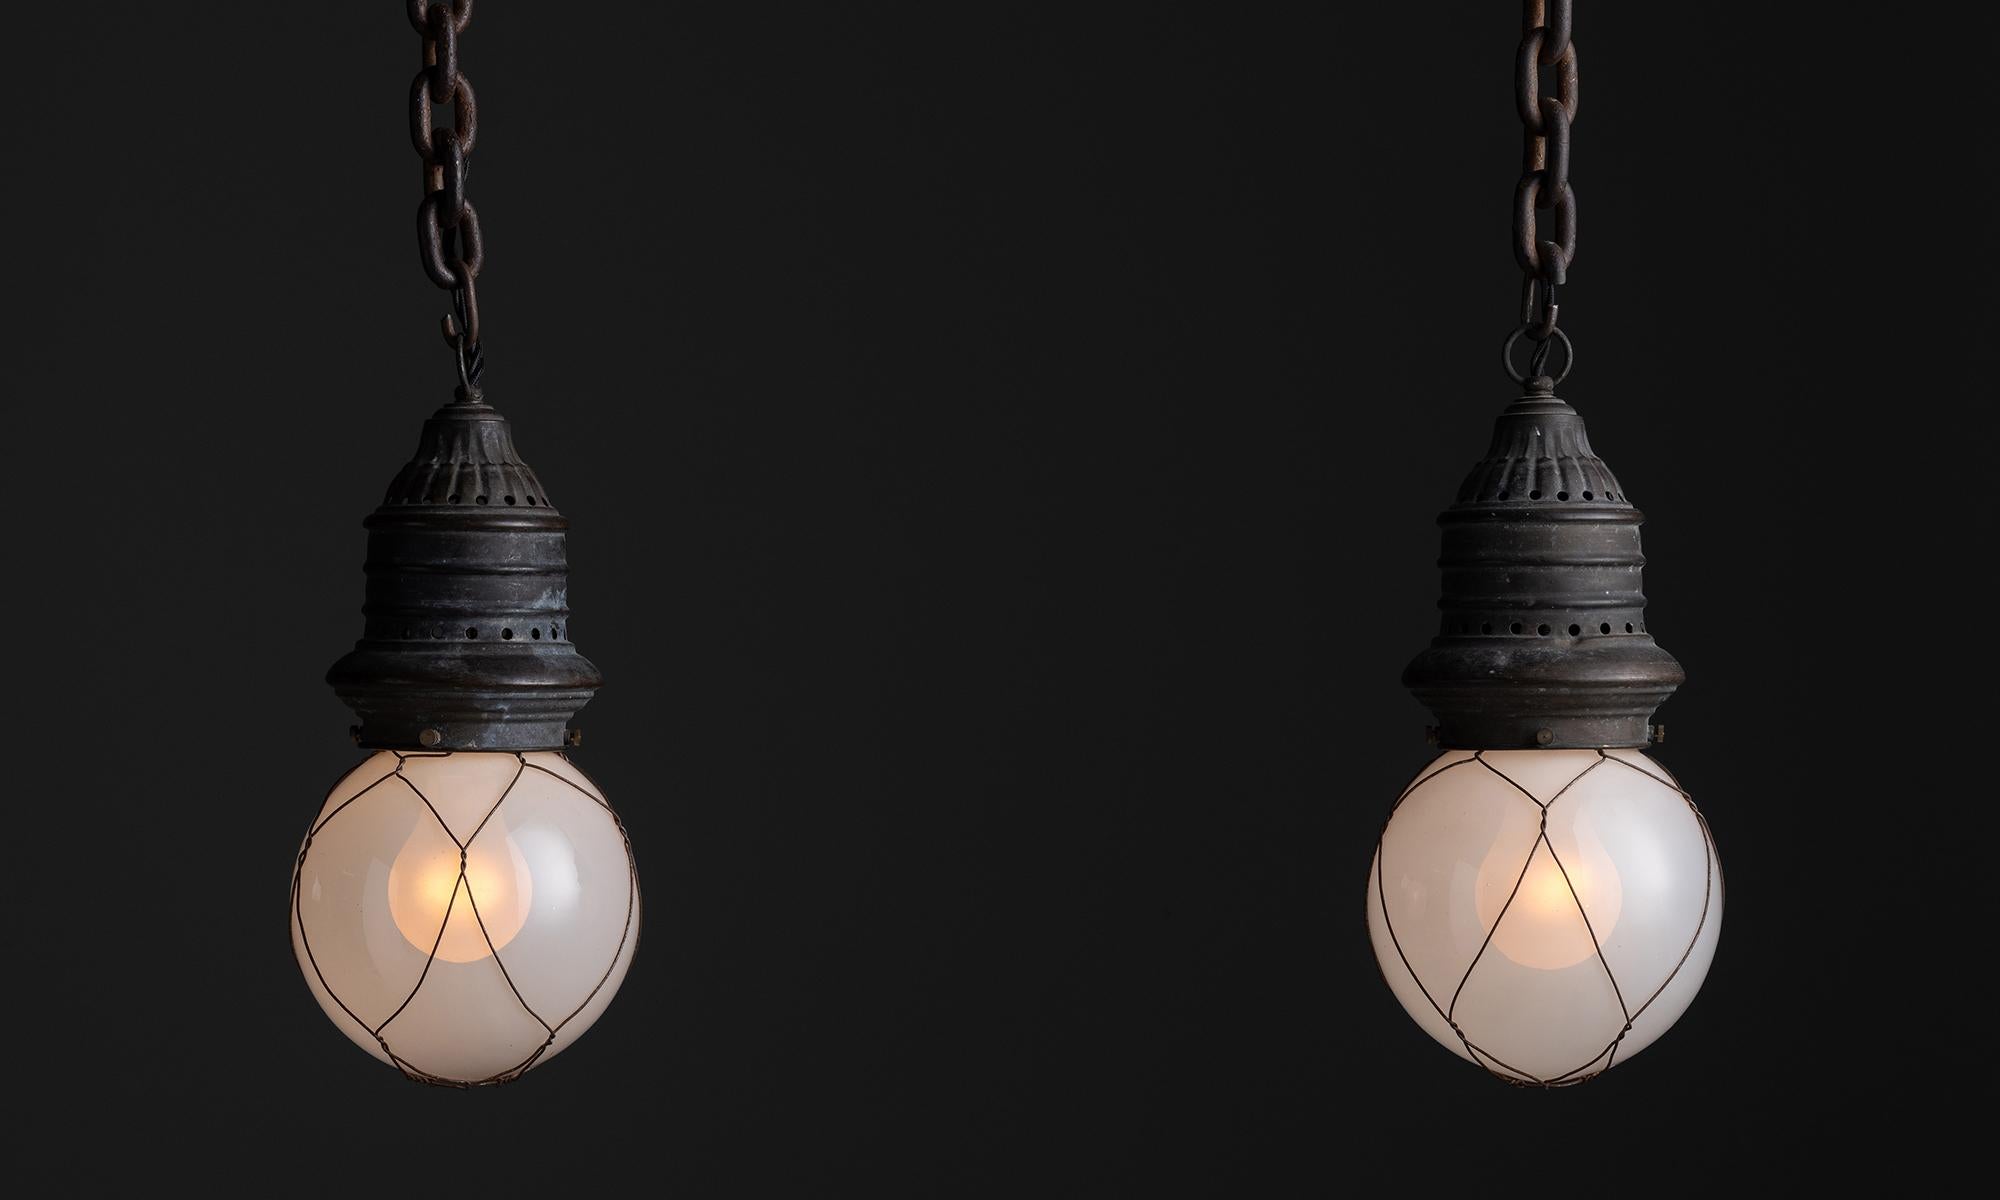 *Please note the price is per unit*

Opaline Globe Caged Pendants, Netherlands, circa 1930

Diminutive industrial pendant with opaline glass globes.

Measures 6”dia x 12”h

*Not UL Listed*